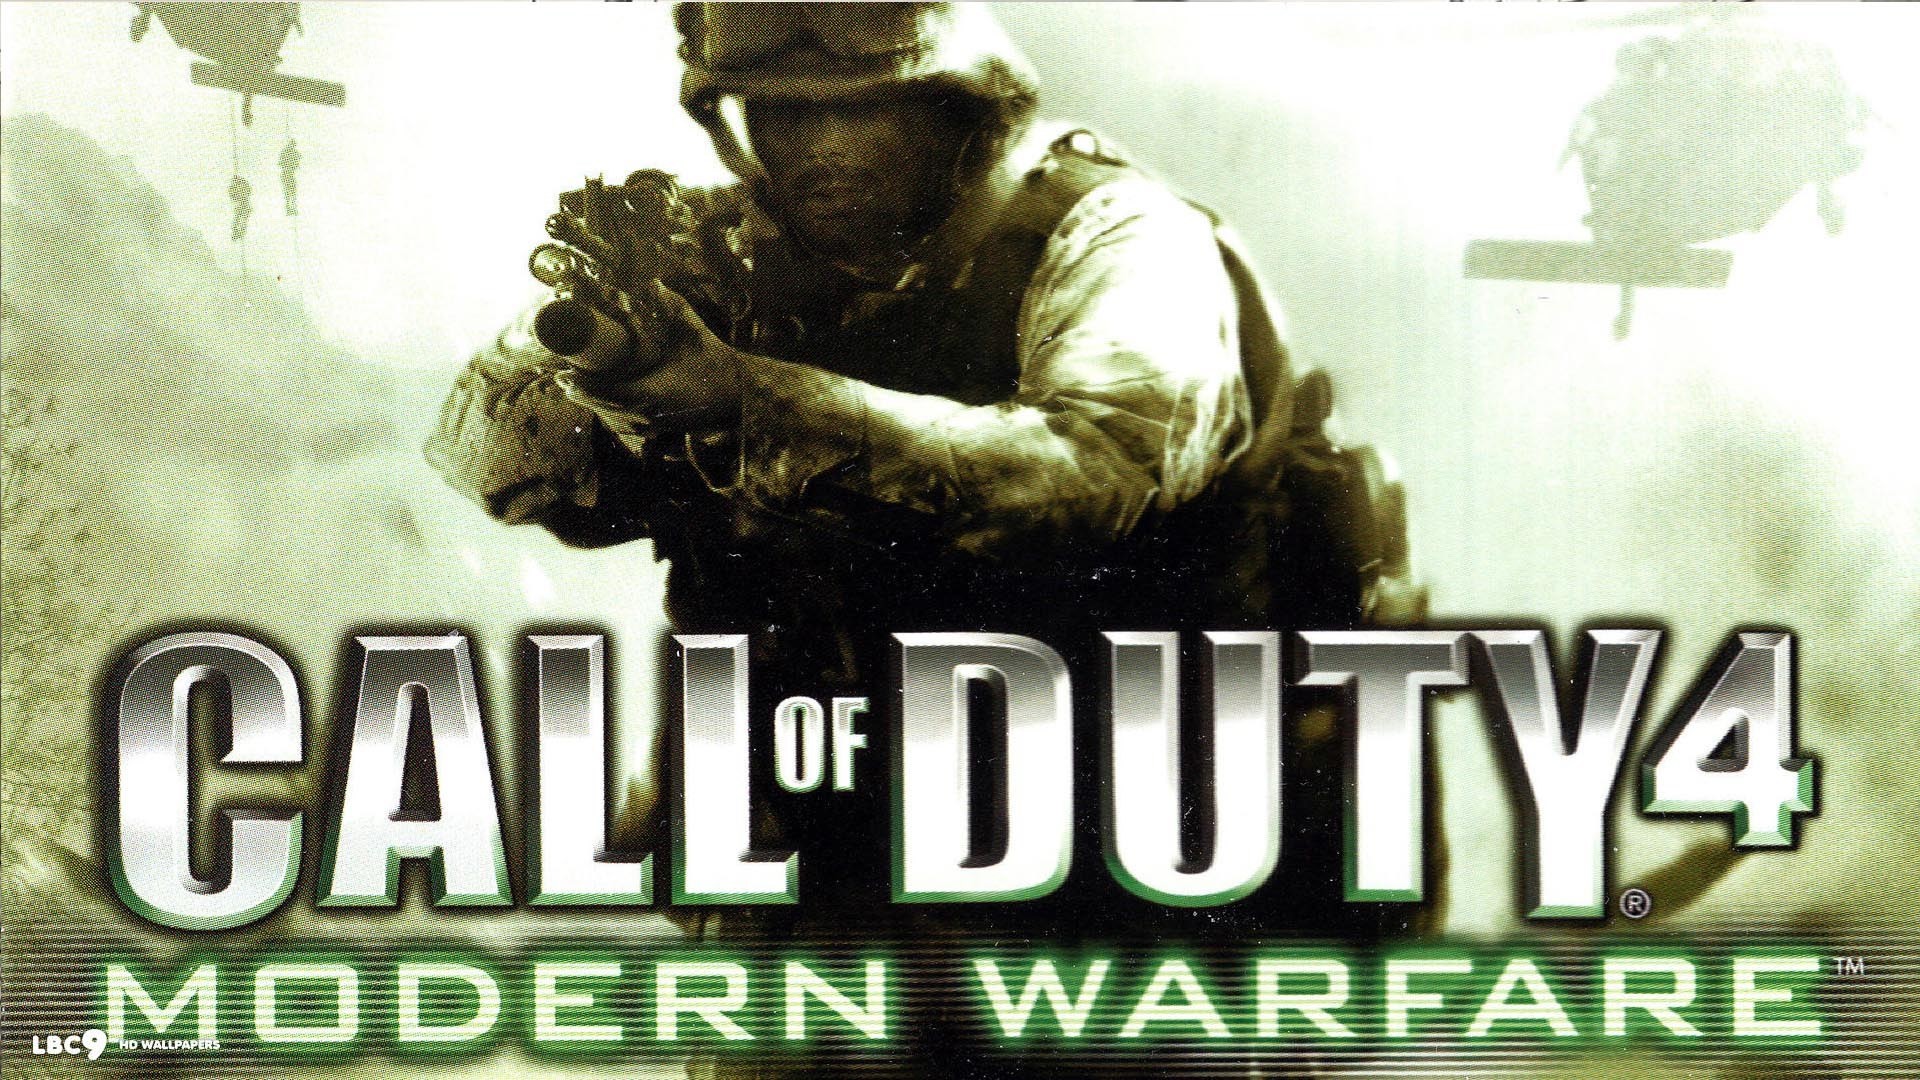 1920x1080 free screensaver wallpapers for call of duty 4 modern warfare